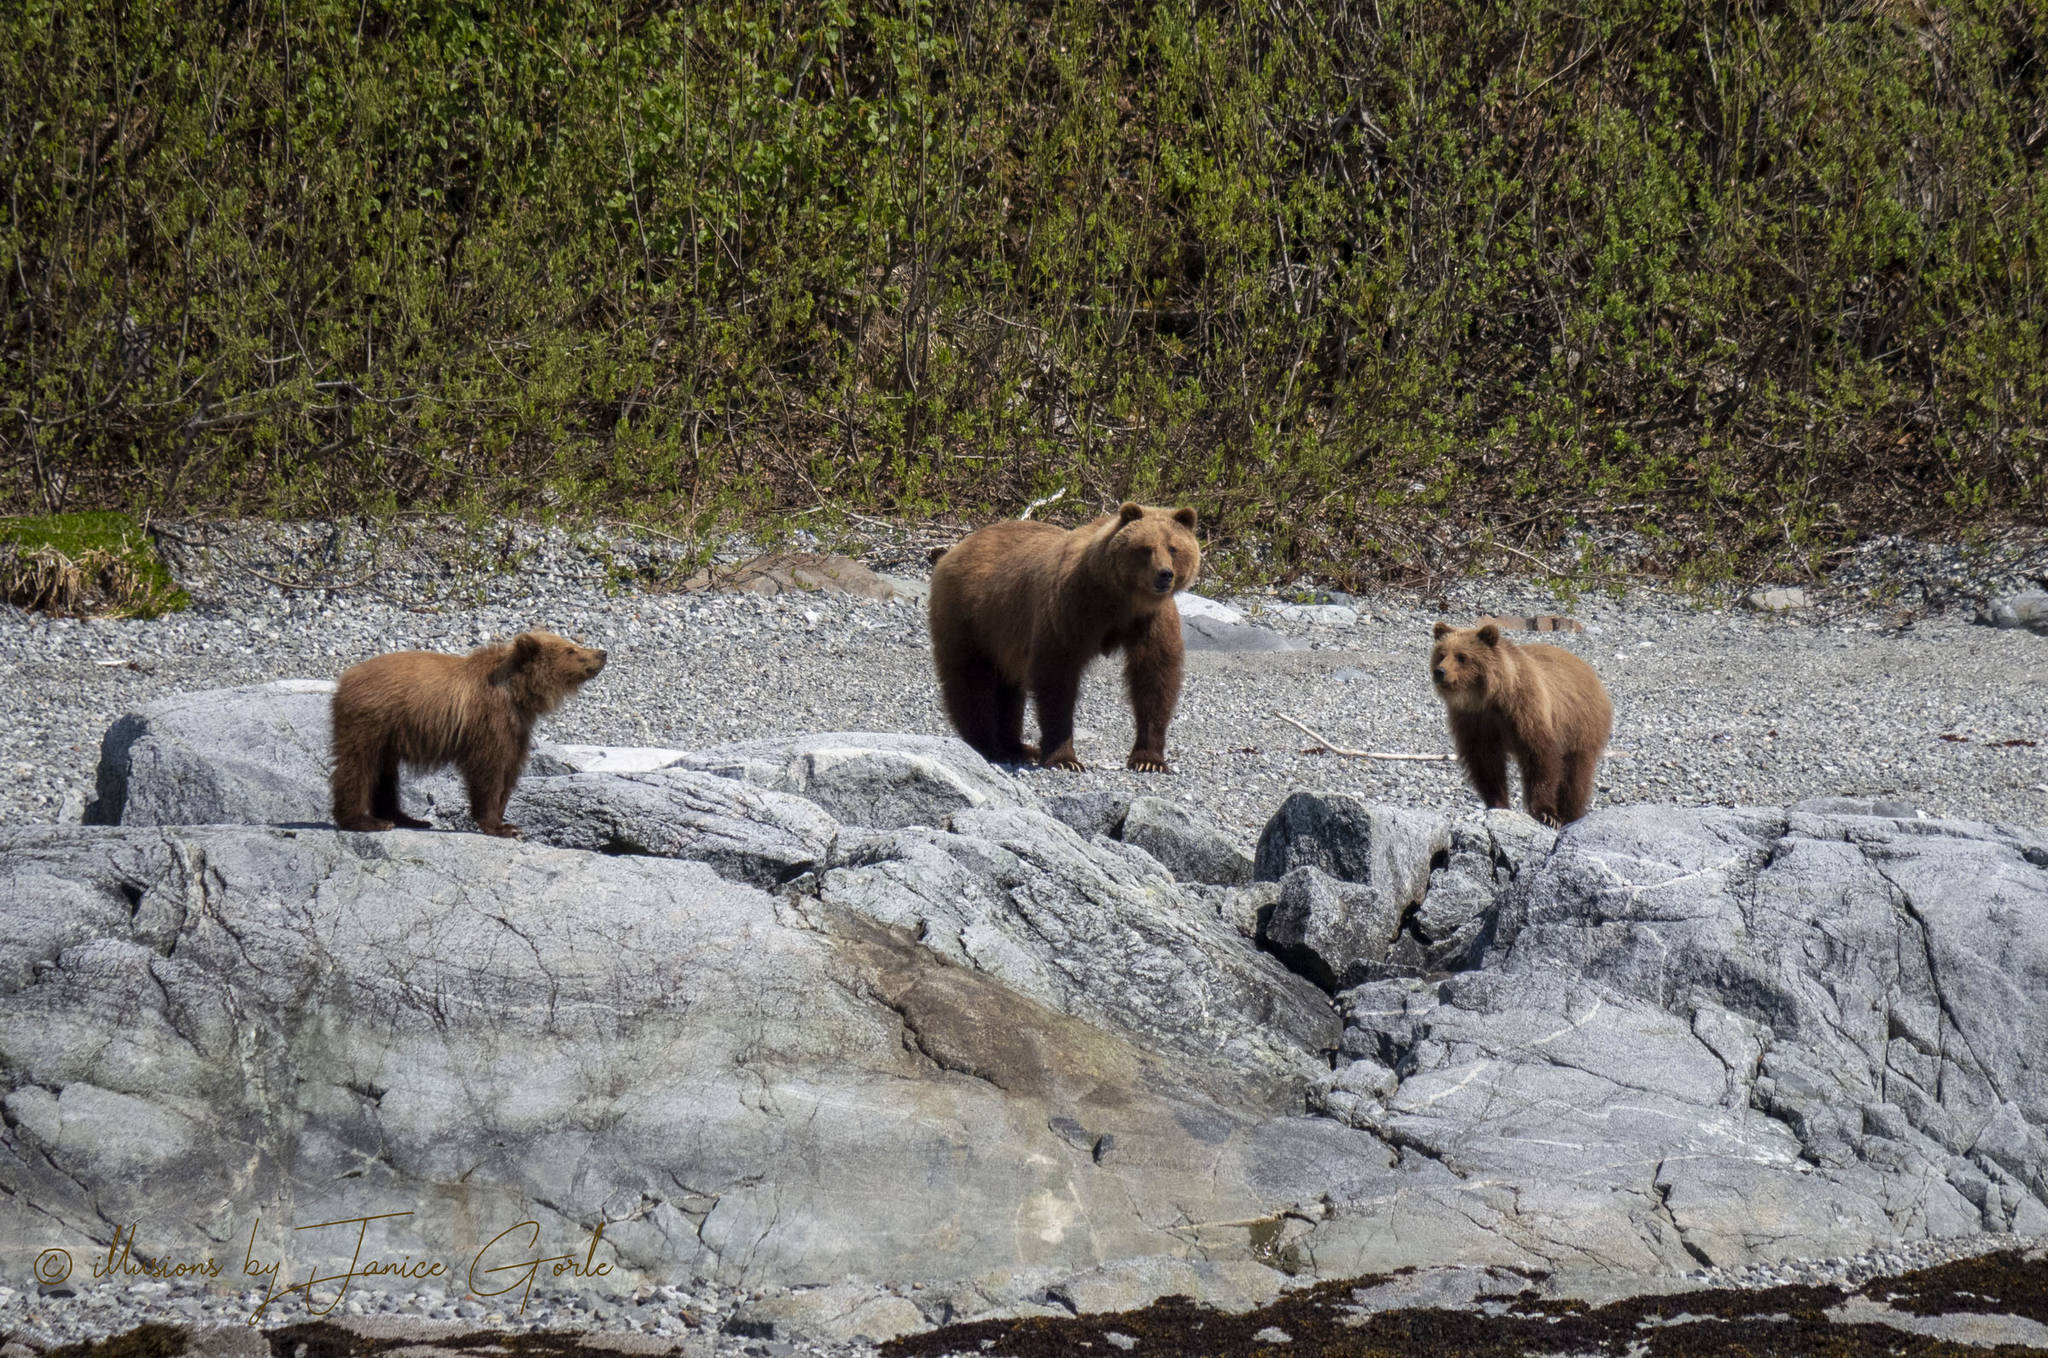 A family of brown bears at Glacier Bay on May 11, 2019. (Courtesy Photo | Janice Gorle)